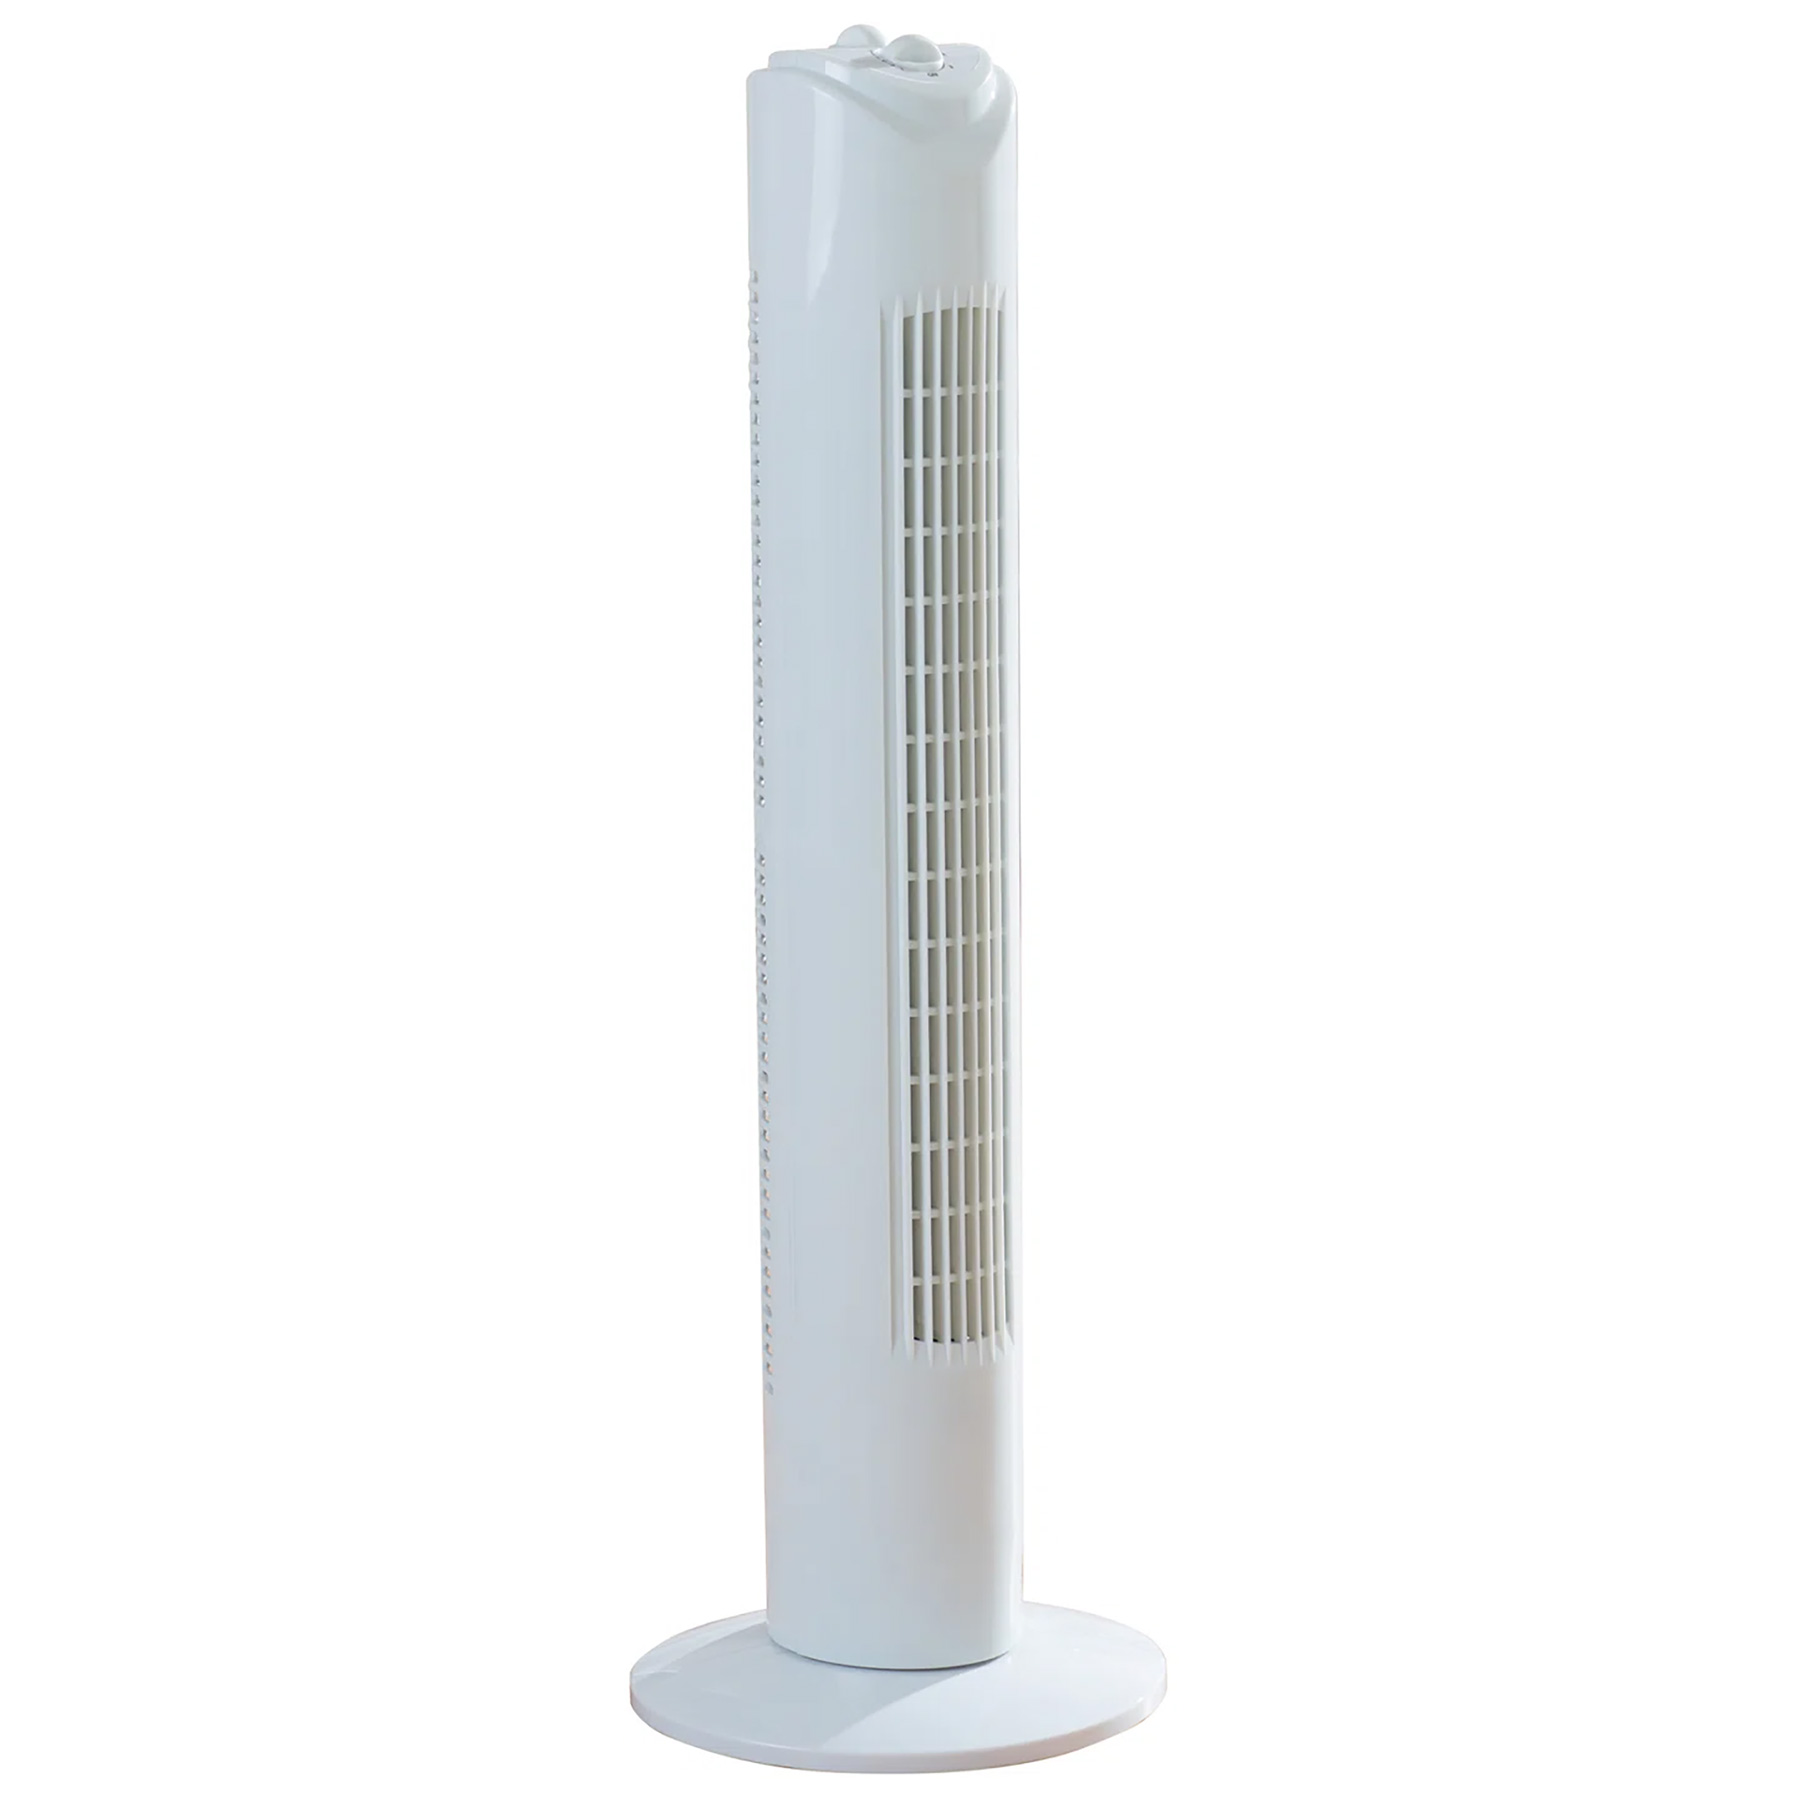 Image of Daewoo COL1570GE 32 Inch Slimline Oscillating Tower Fan in White